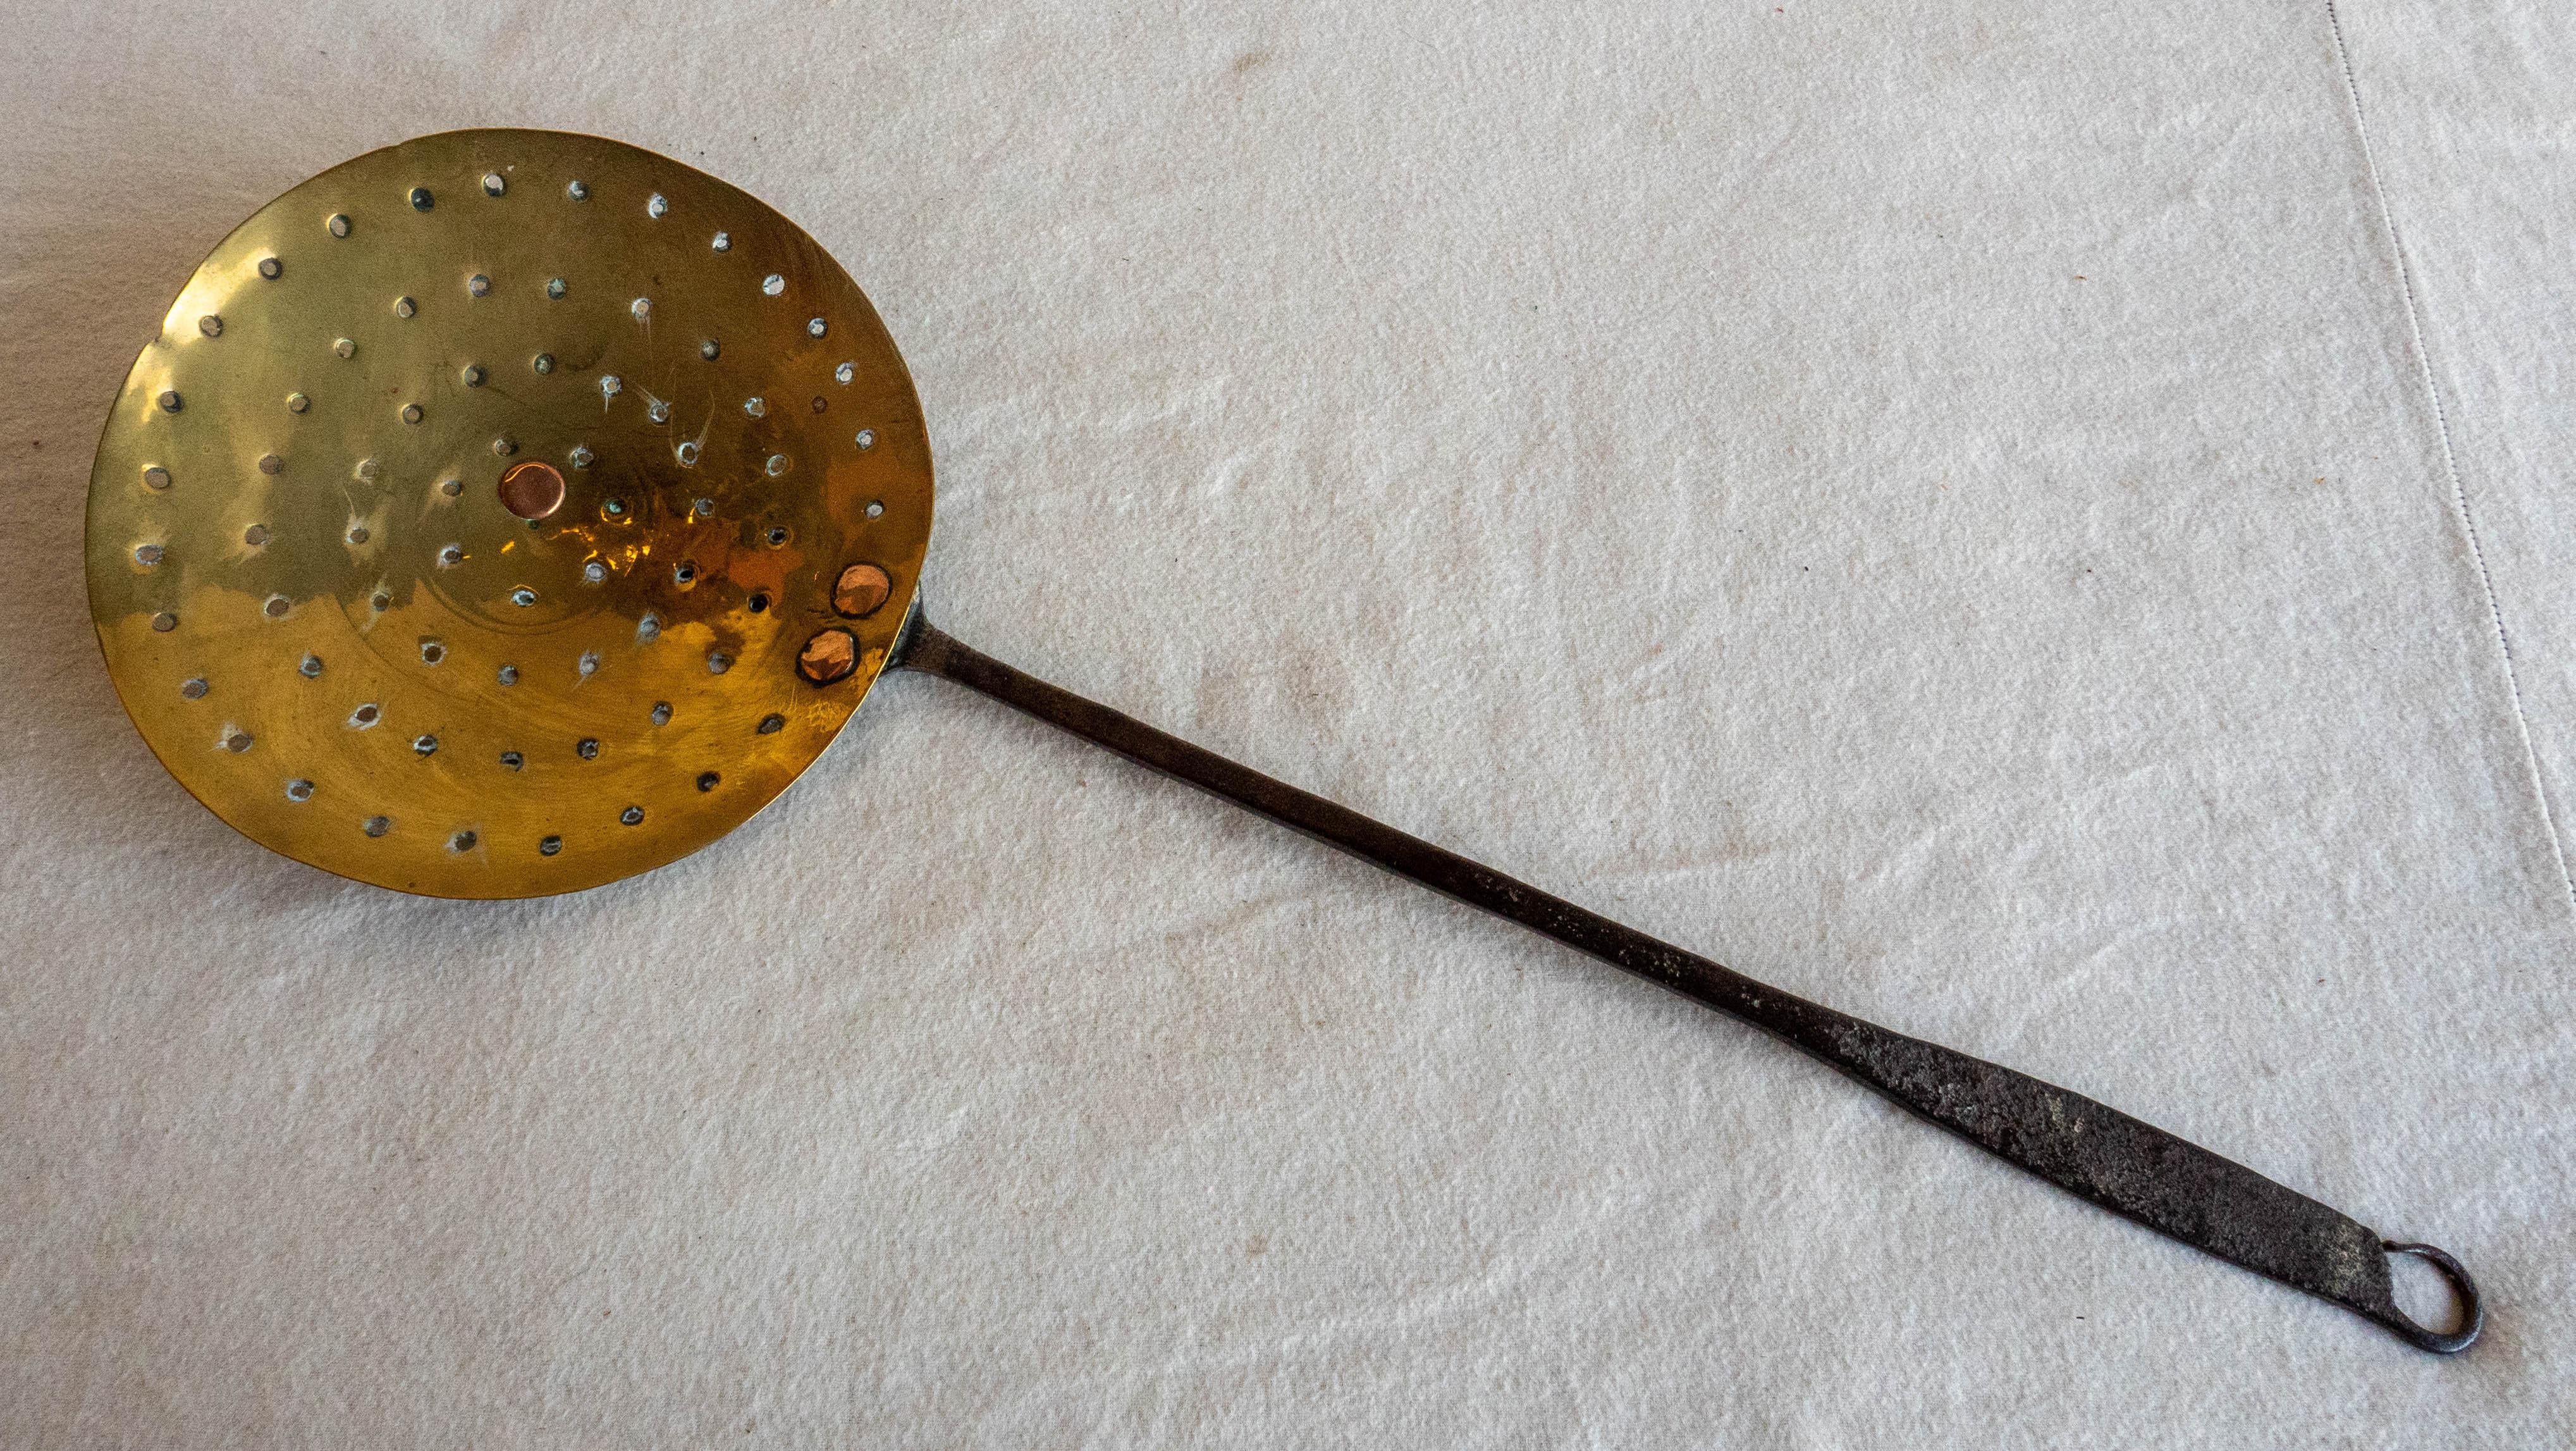 Early 19th century English brass sieve with concentric piercings in bowl and steel handle, circa 1820.